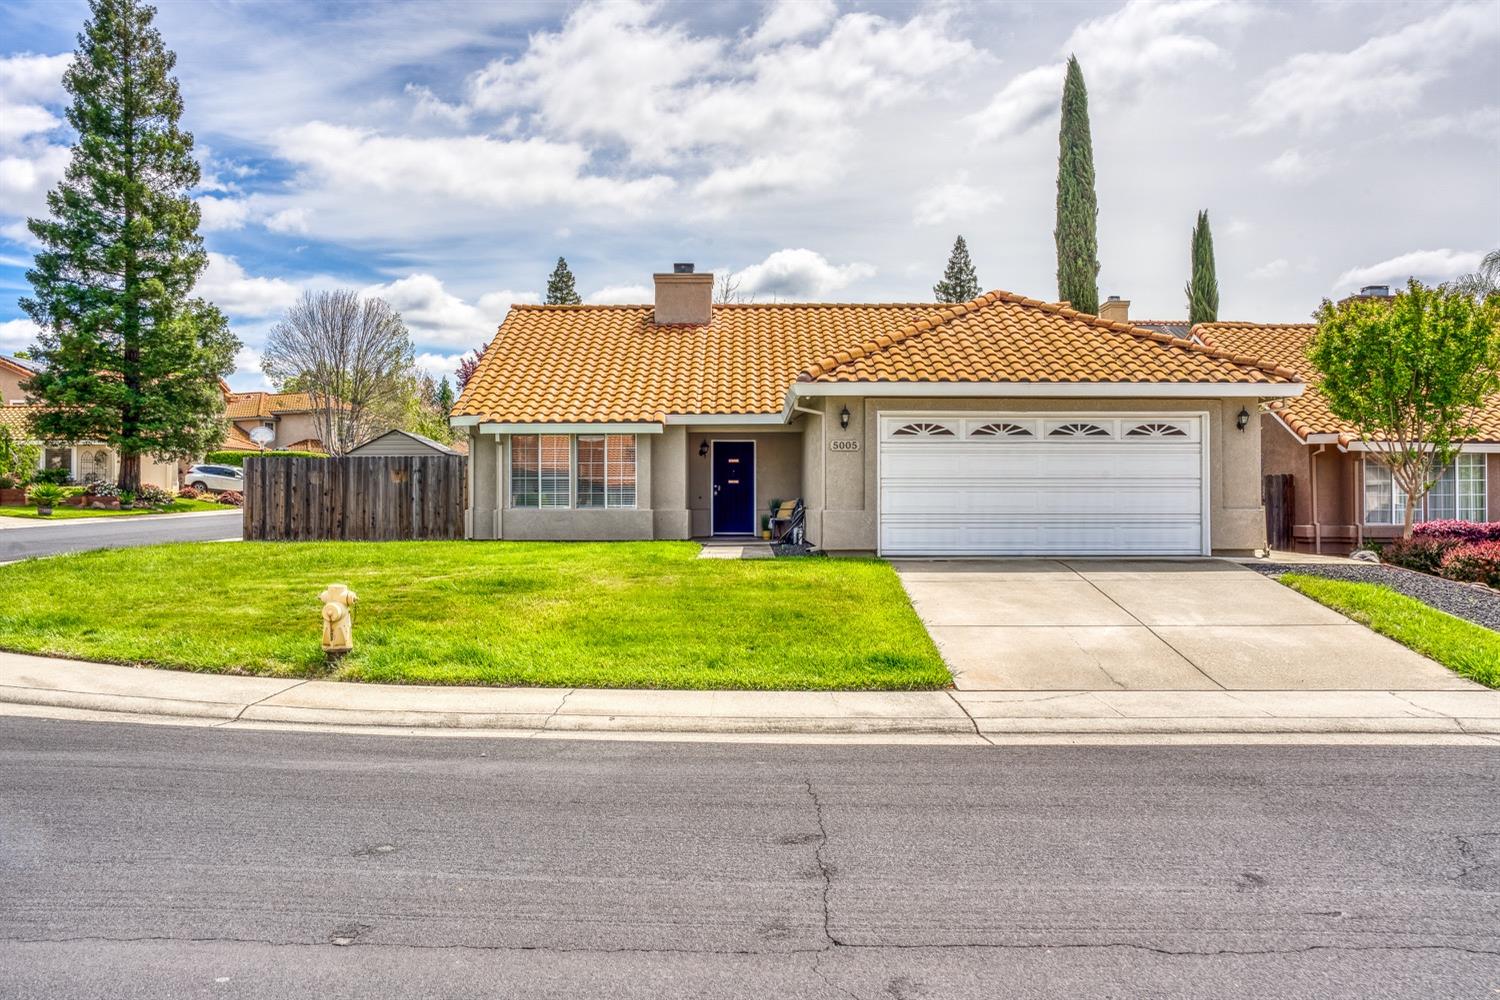 Photo of 5005 Charter Rd in Rocklin, CA